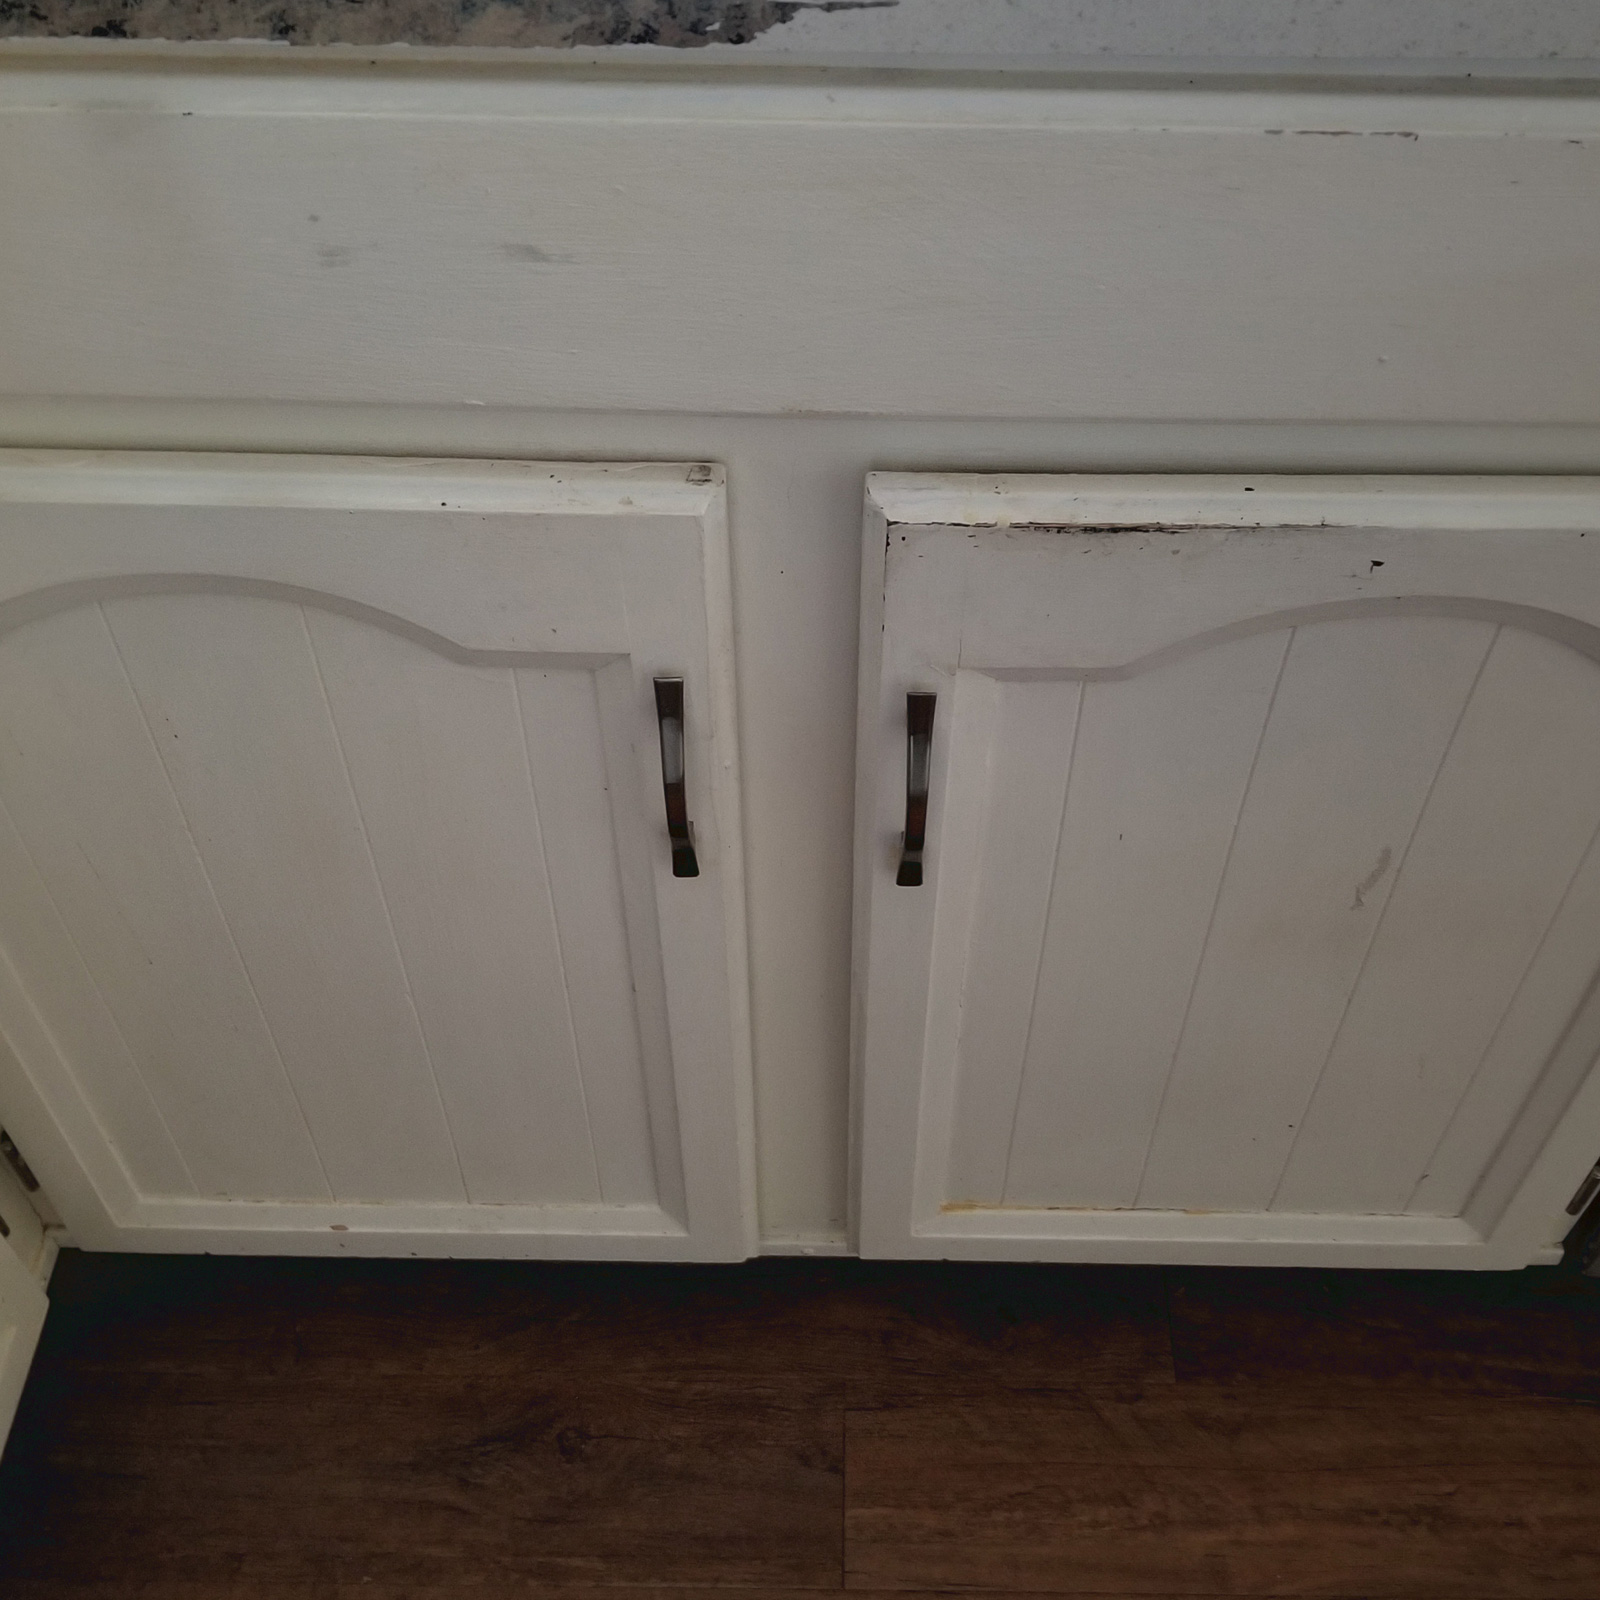 Entry 77 - These less-than-lovely cabinets appear tattered & torn